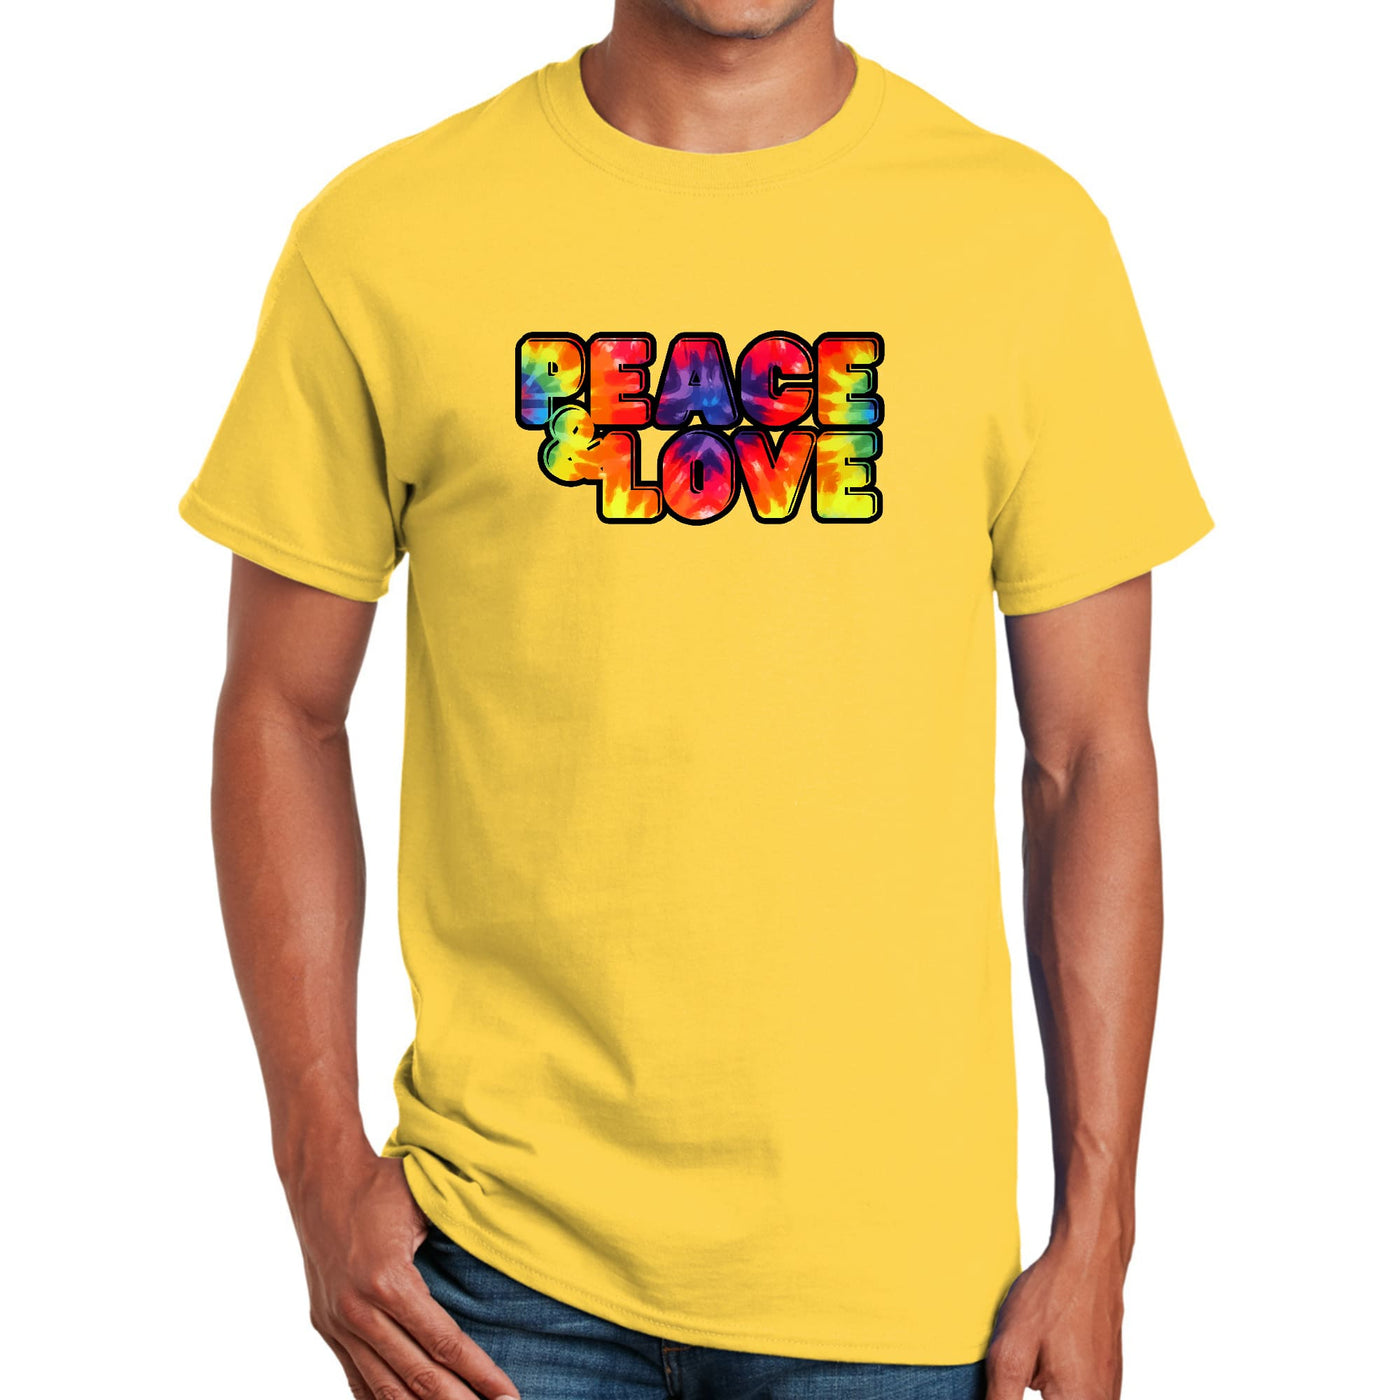 Mens Performance T - shirt Peace And Love Multicolor Illustration - T - Shirts